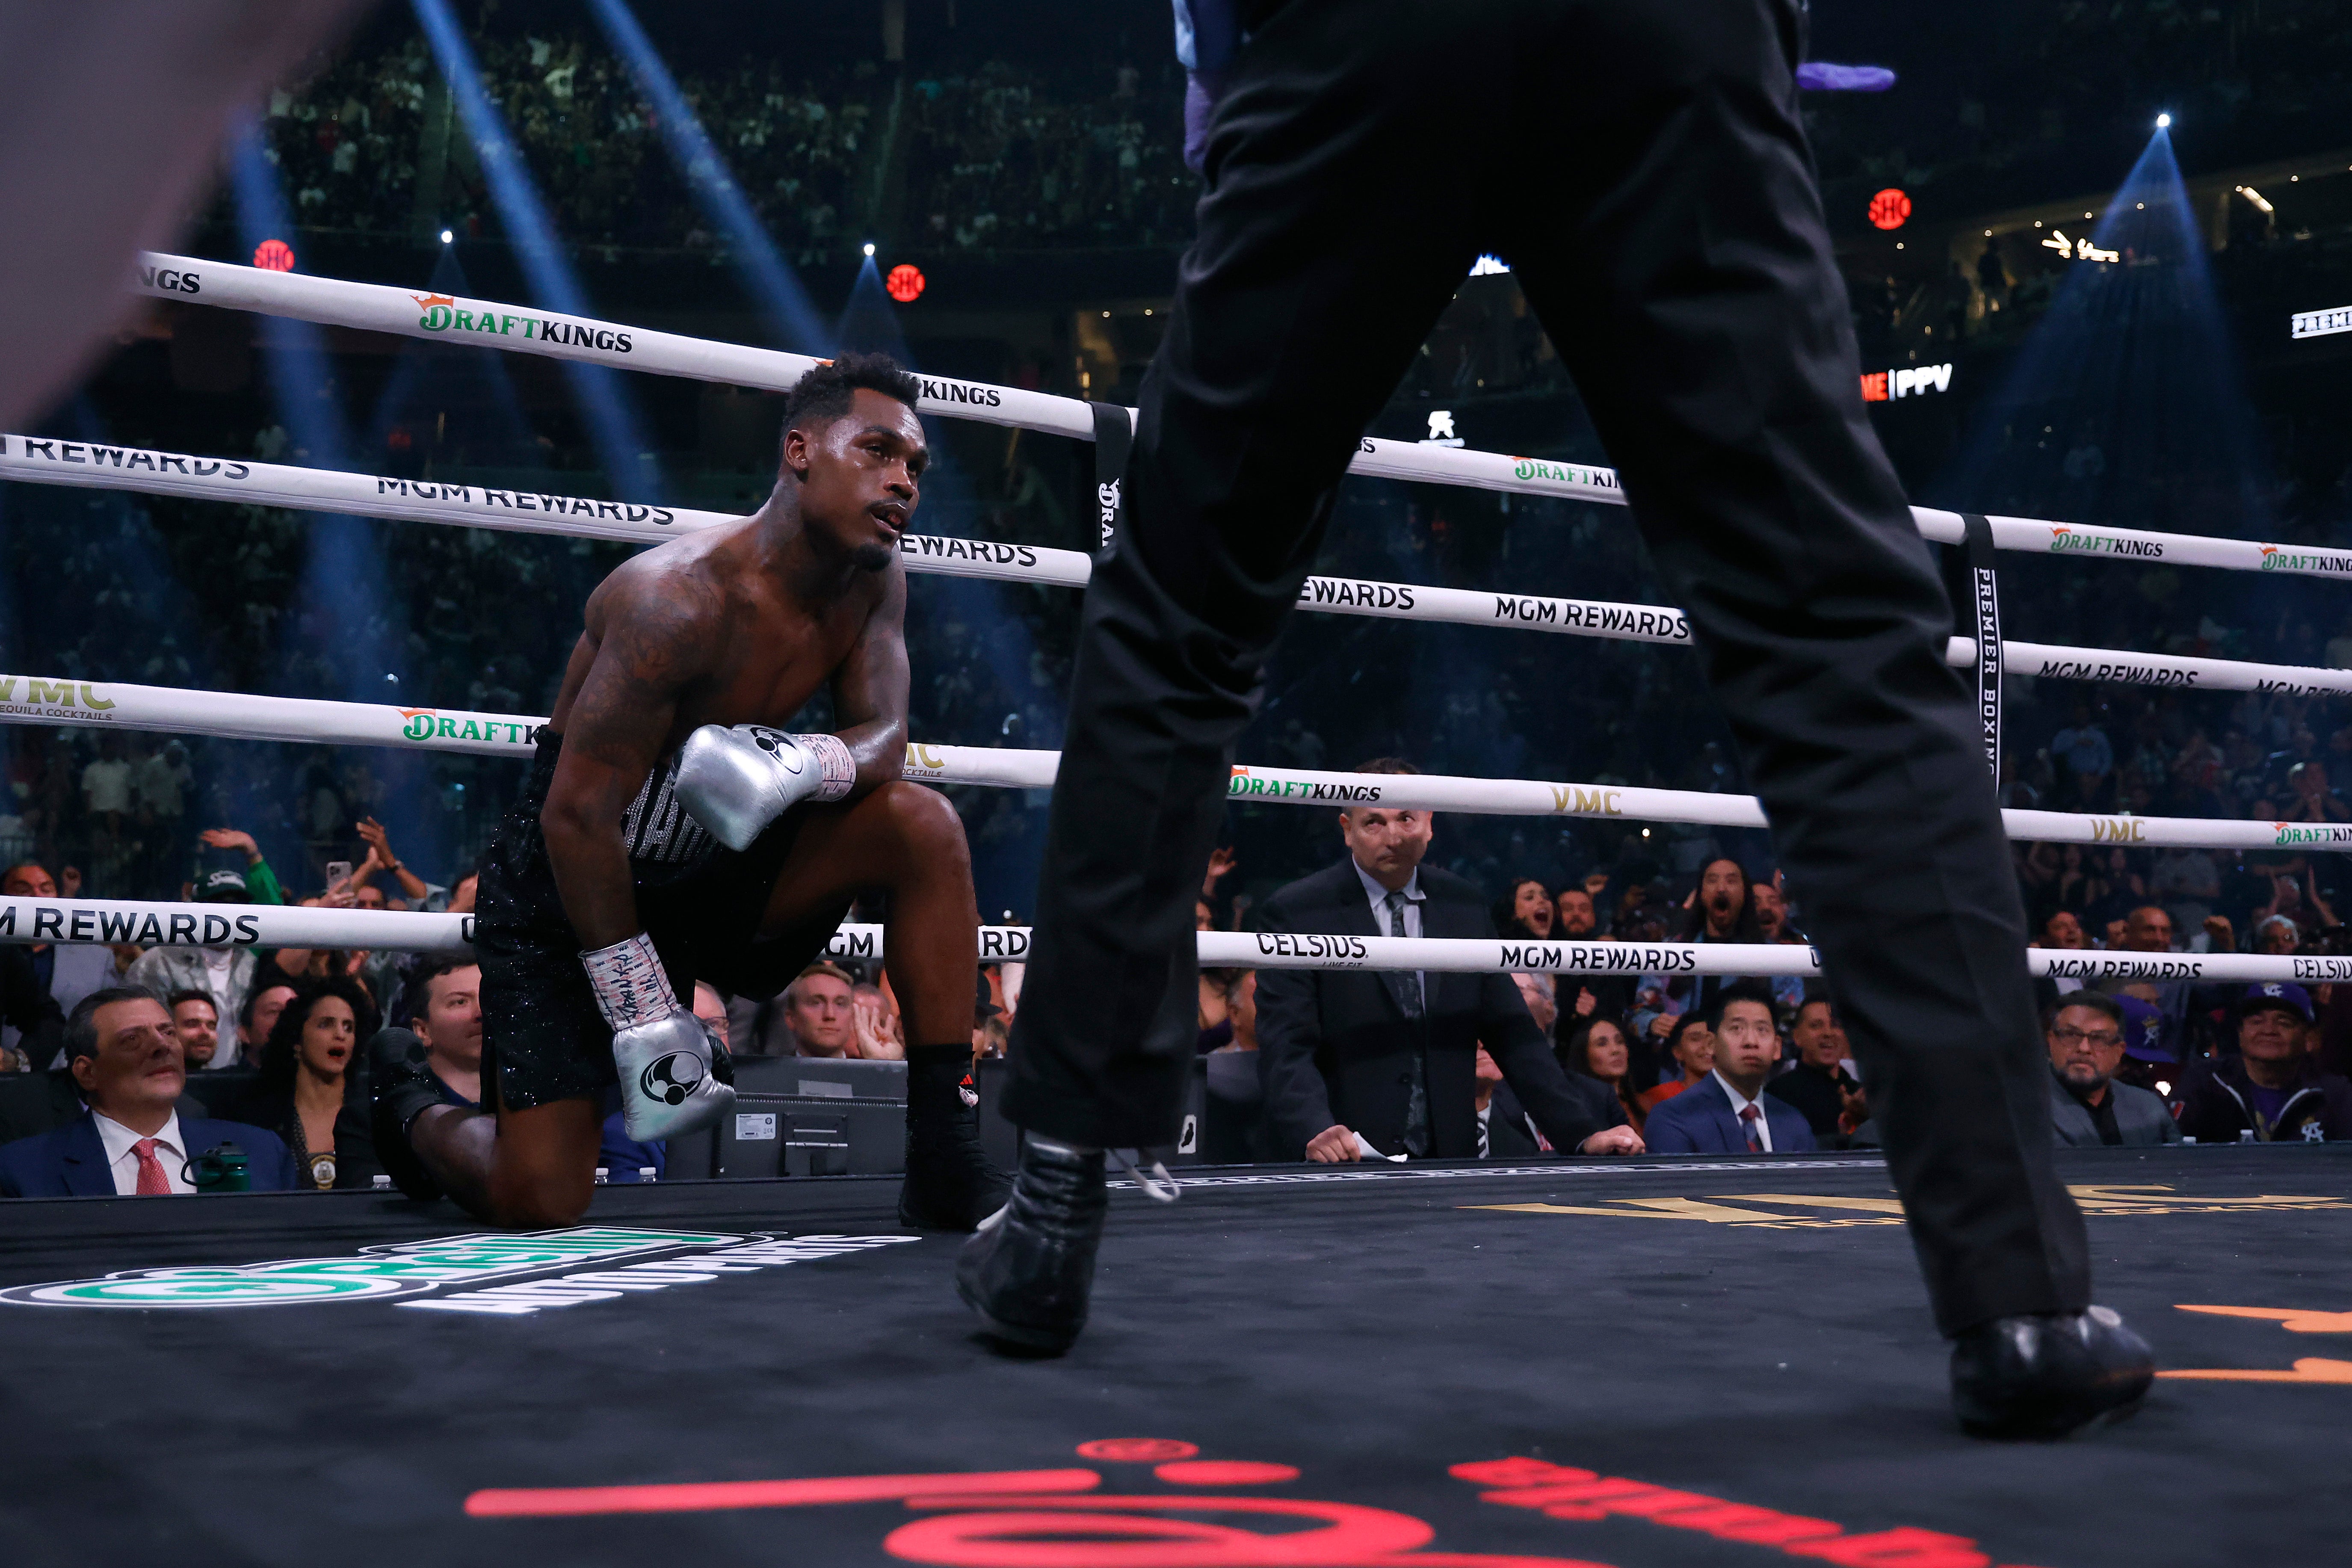 Charlo was dropped to a knee in the seventh round